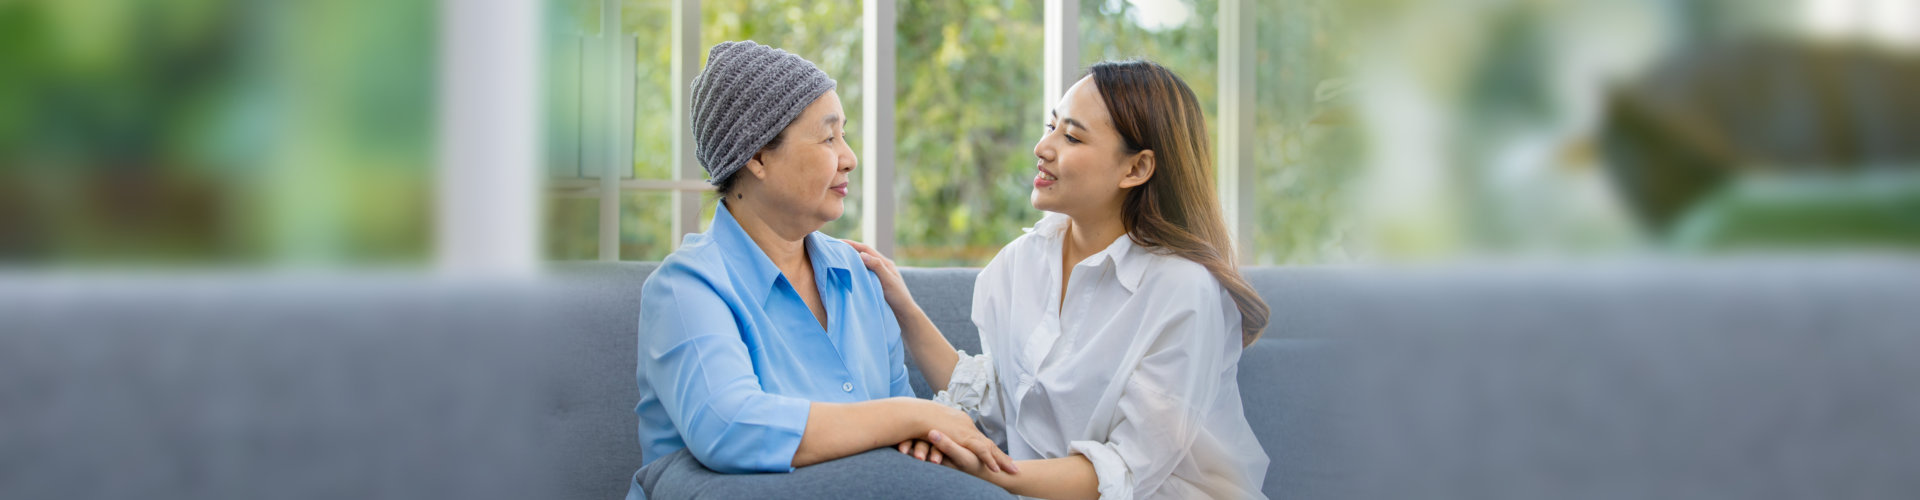 senior patient with cancer talking with caregiver